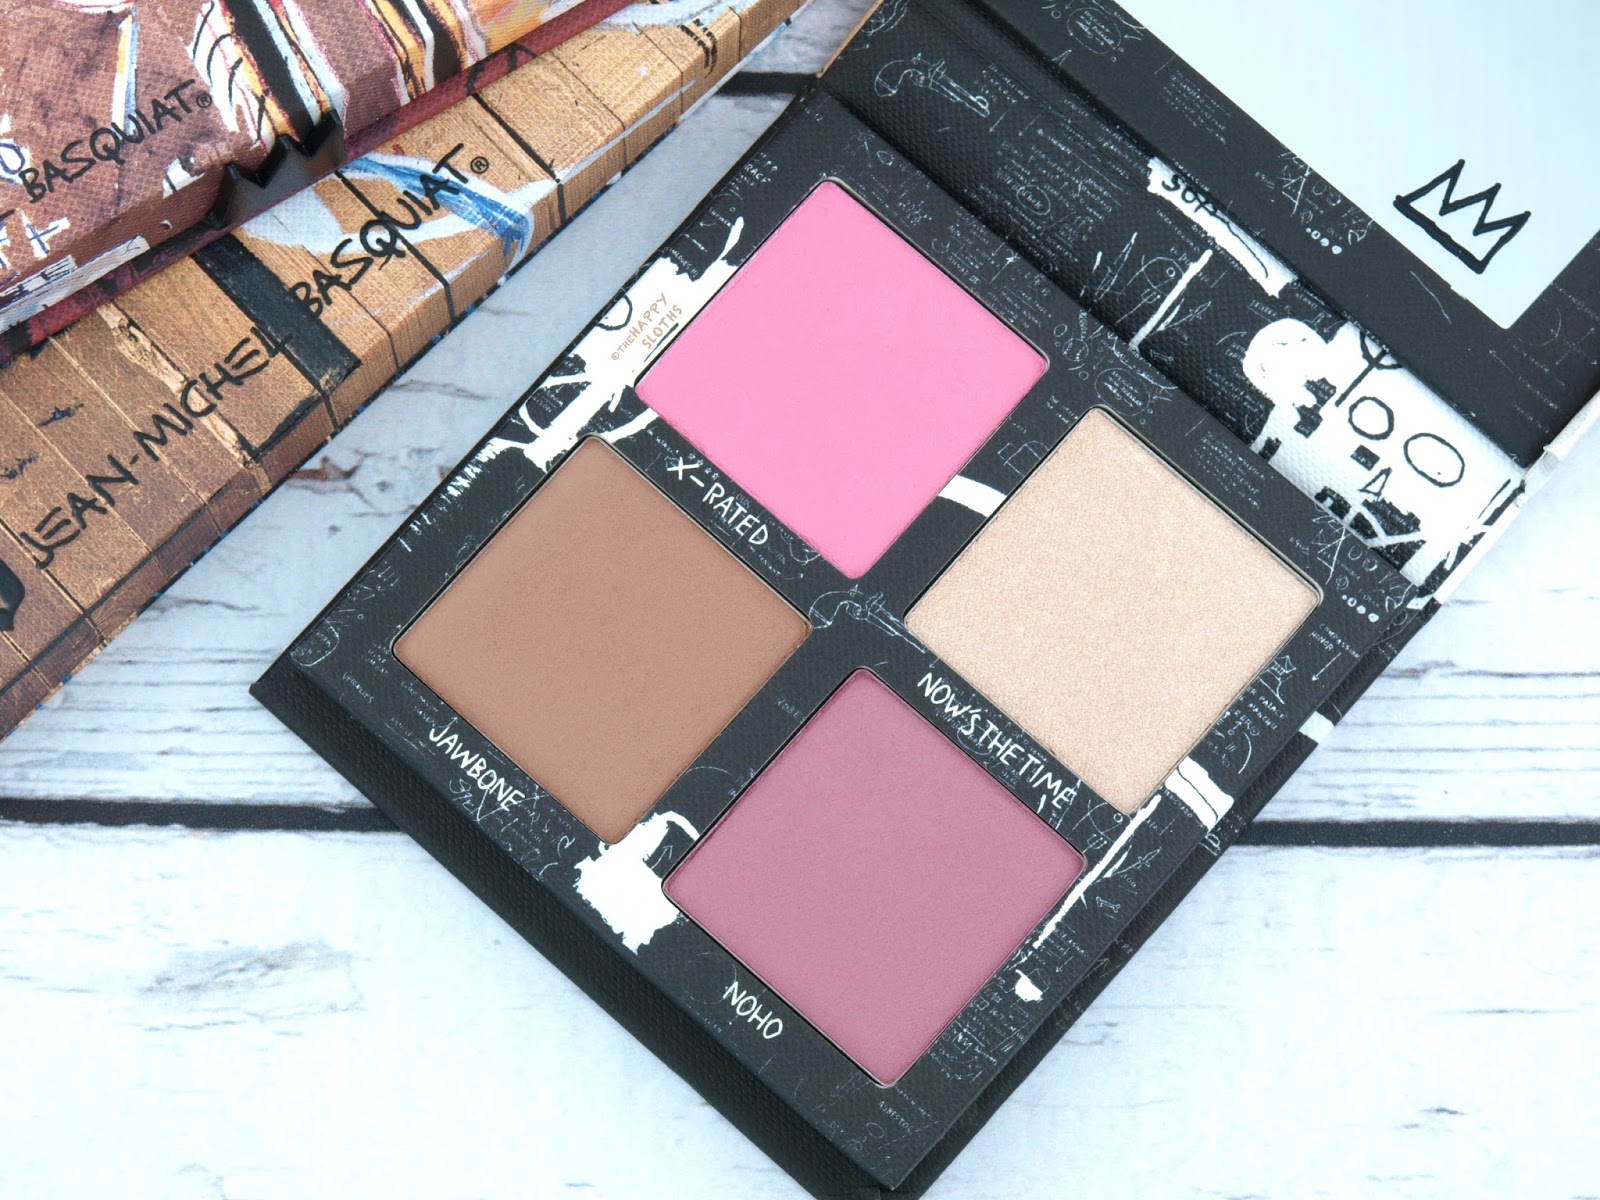 Urban Decay x Basquiat Gallery Blush Palette: Review and Swatches